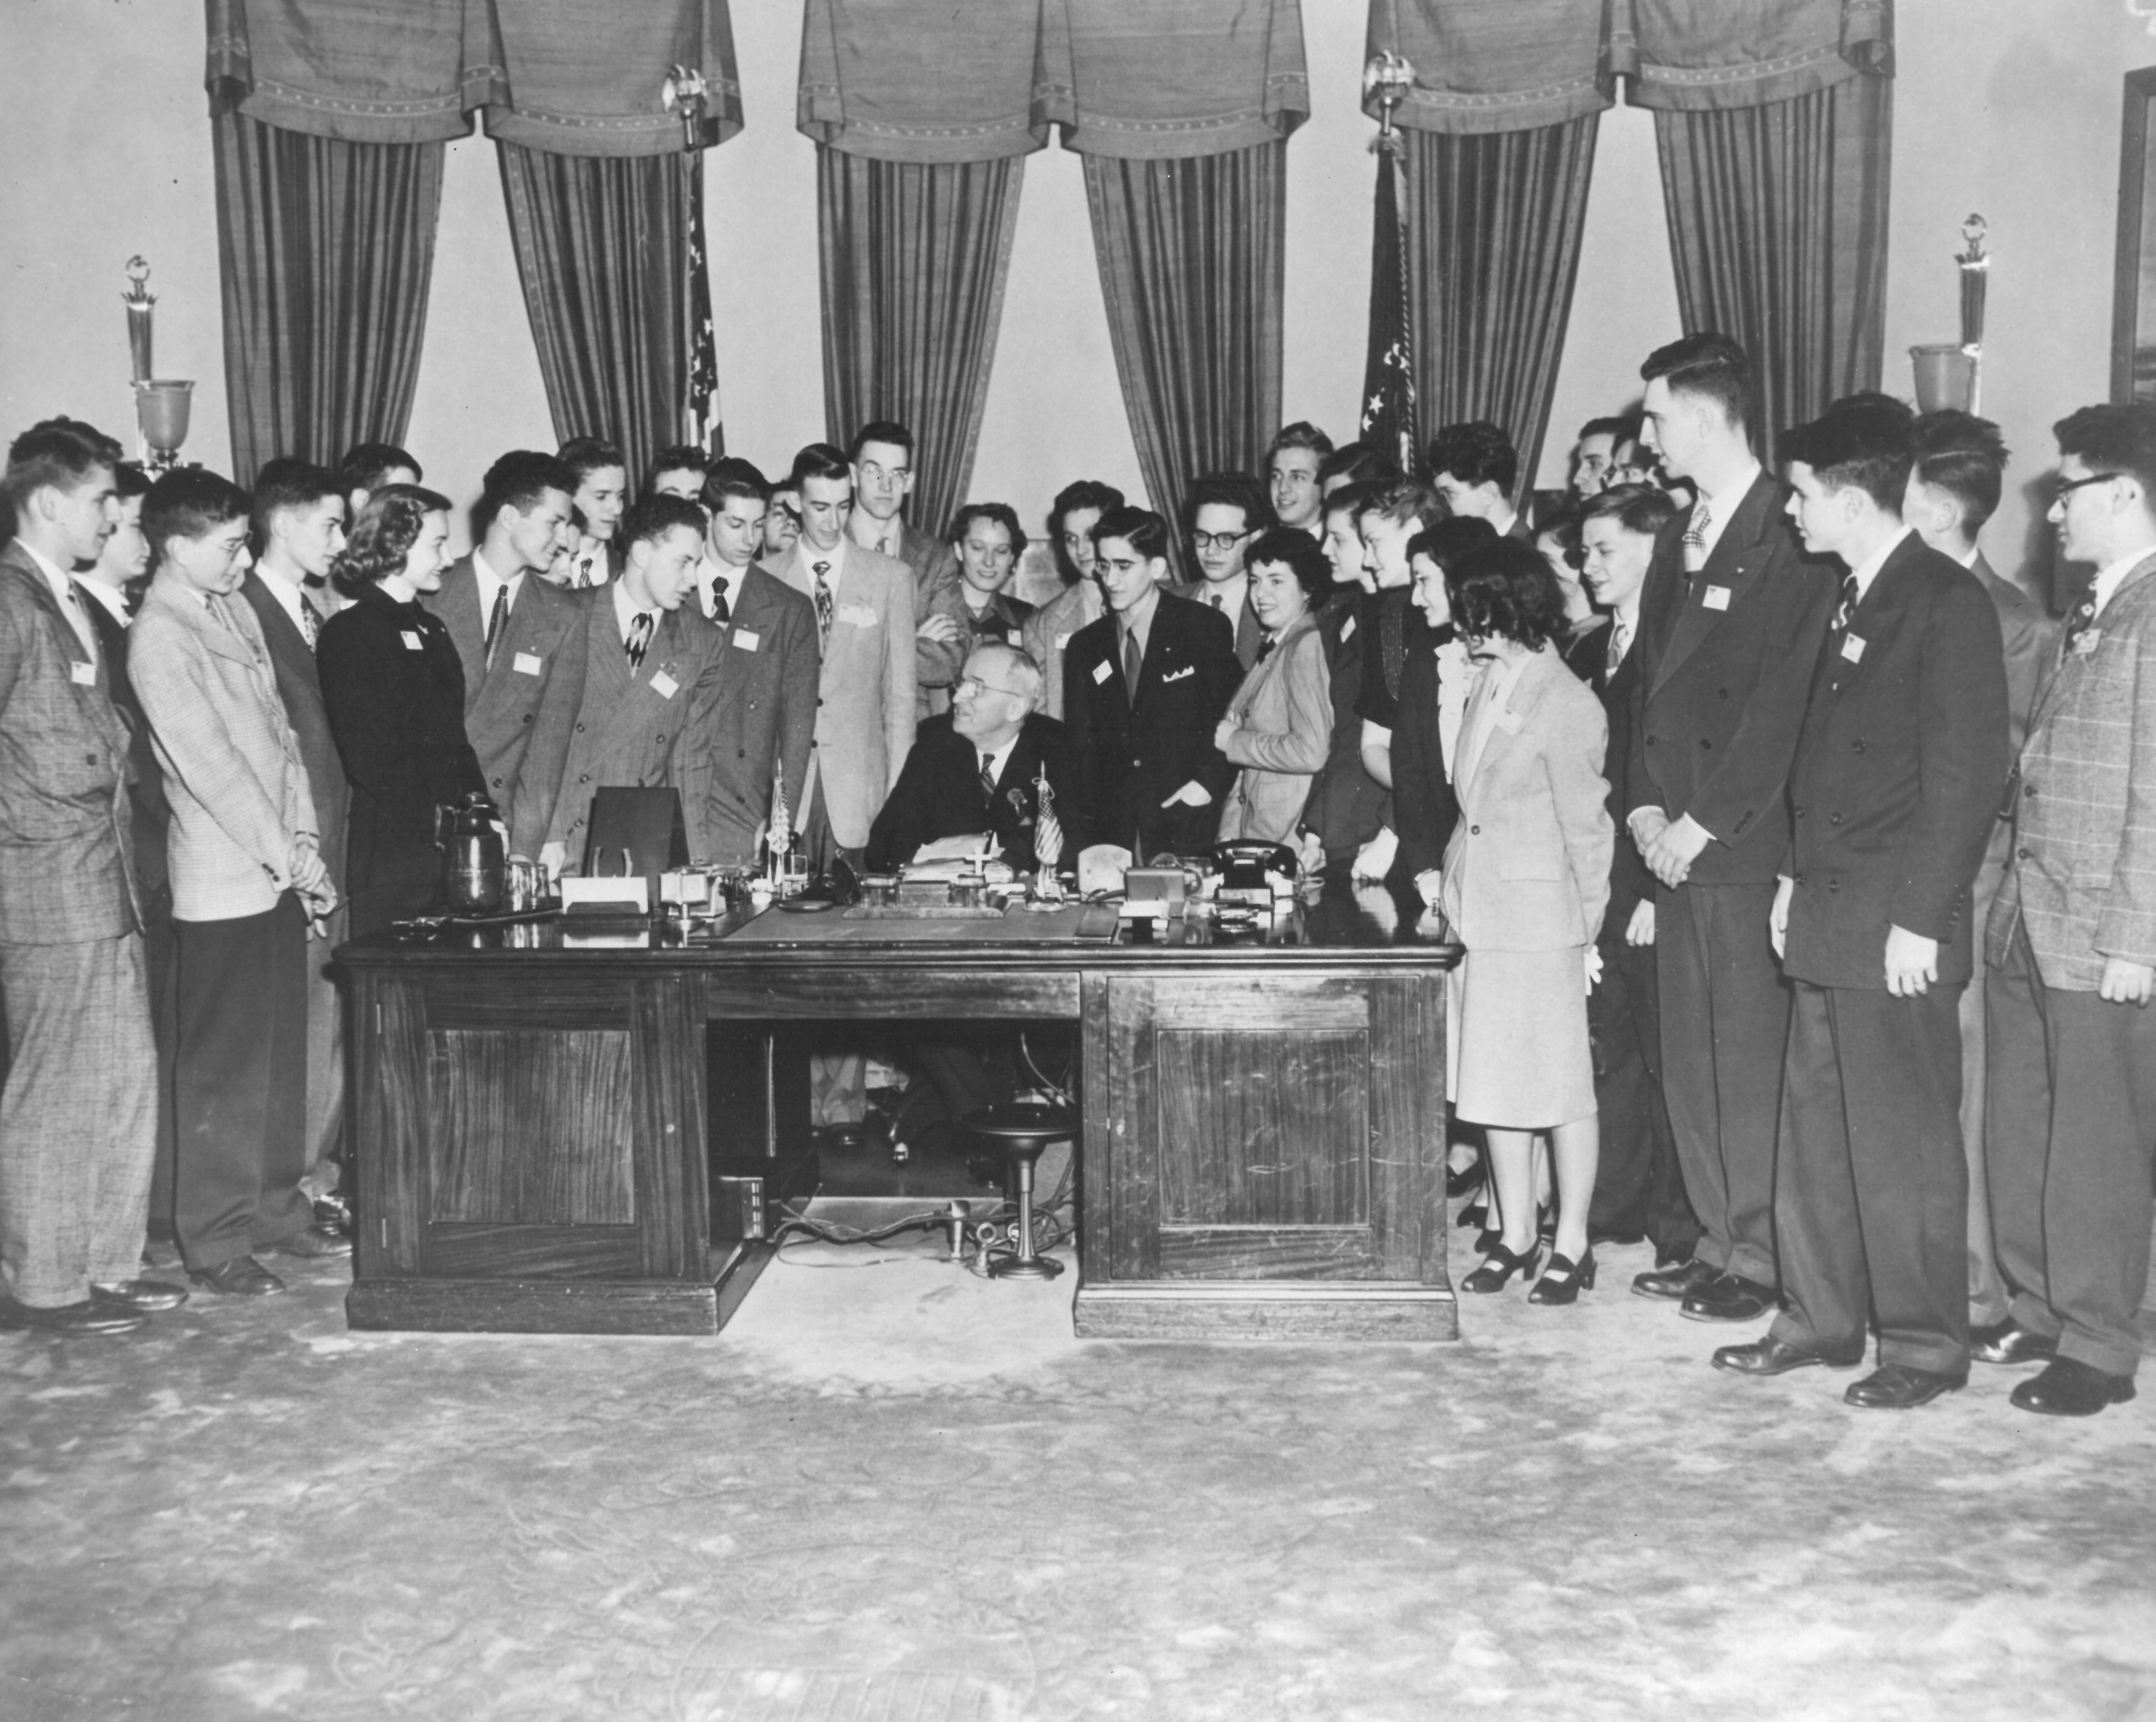 Edward Thorp’s Westinghouse Science Talent Search class meeting President Harry Truman.